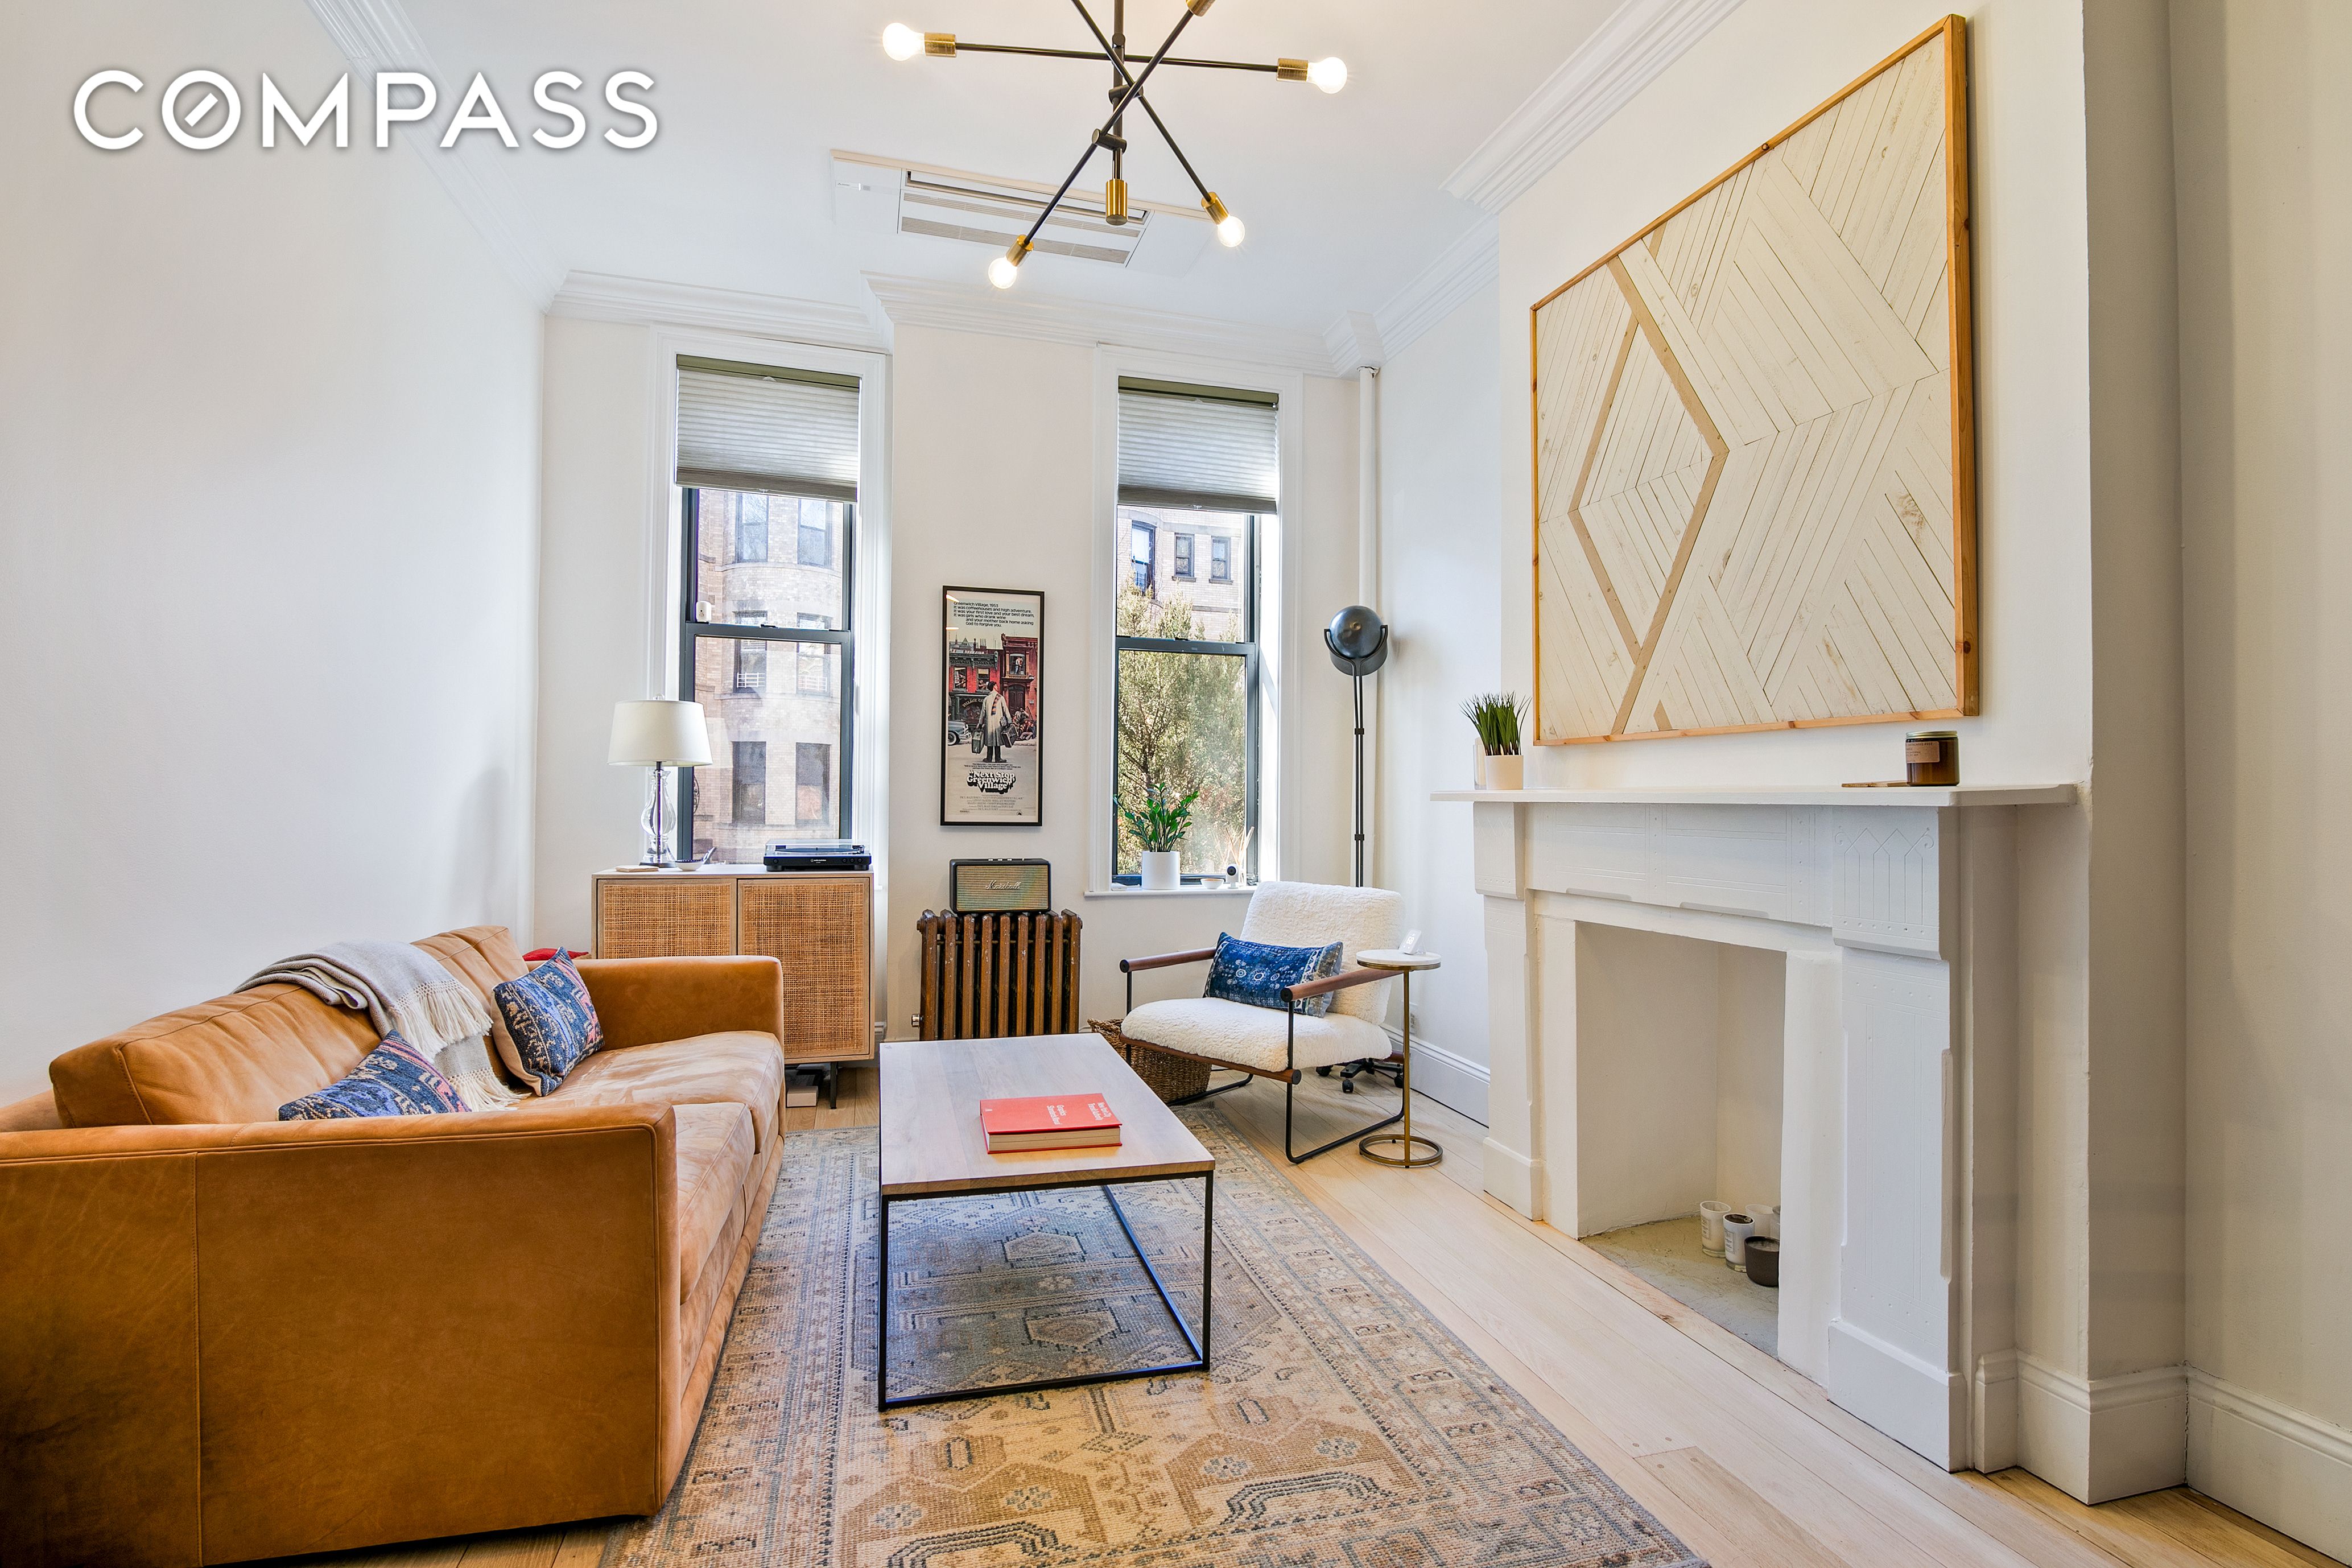 159 Garfield Place 1L, Park Slope, Brooklyn, New York - 2 Bedrooms  
2 Bathrooms  
6 Rooms - 